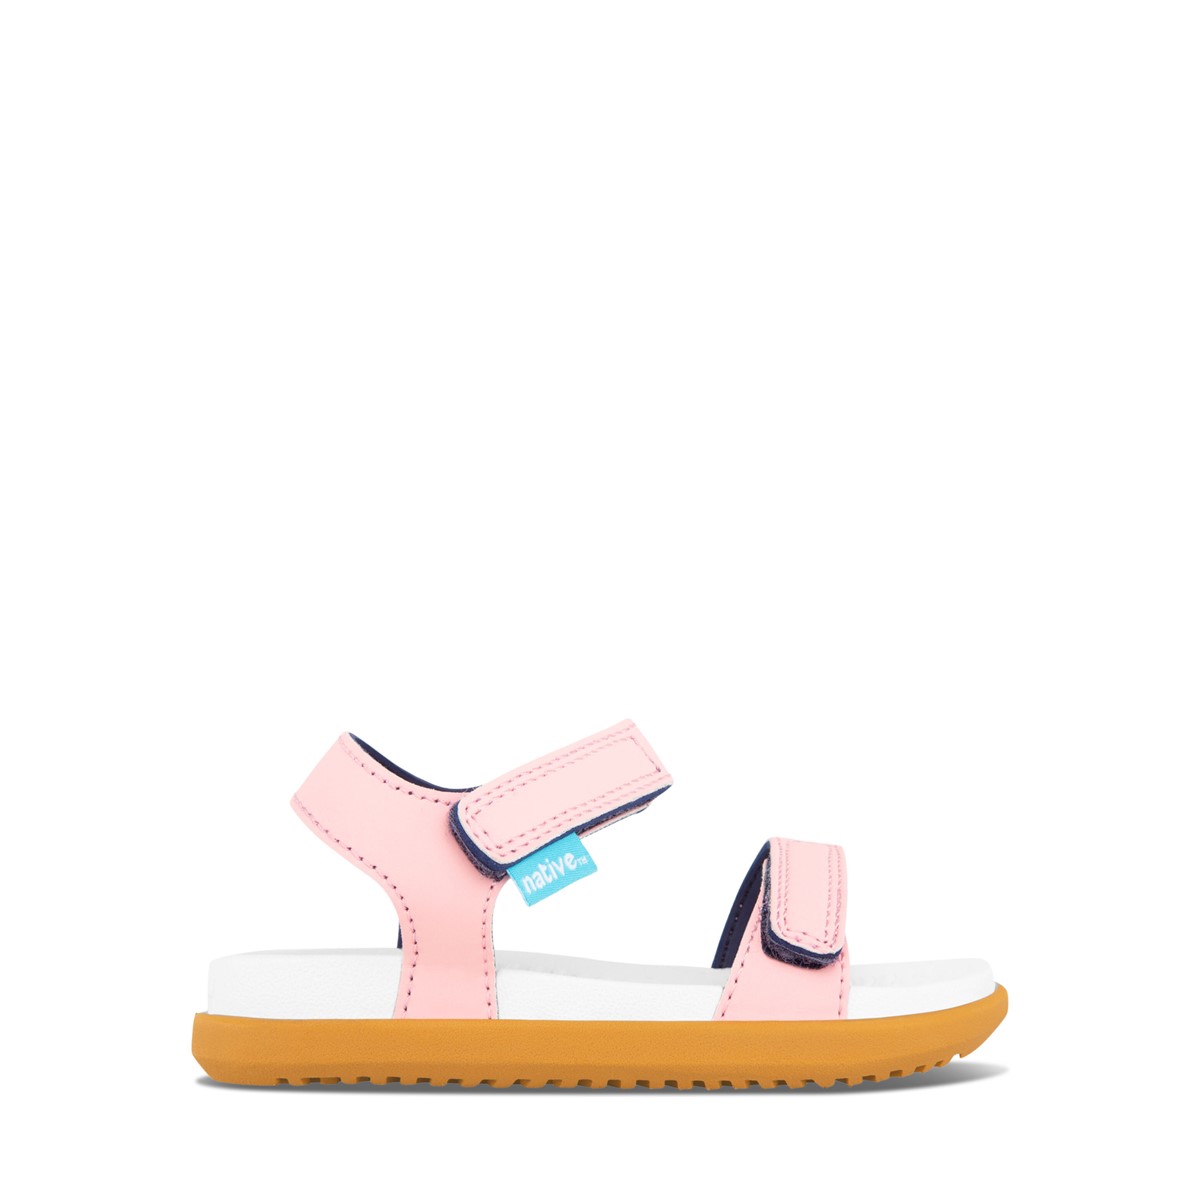 Little Kids' Charley Sandals in Pink